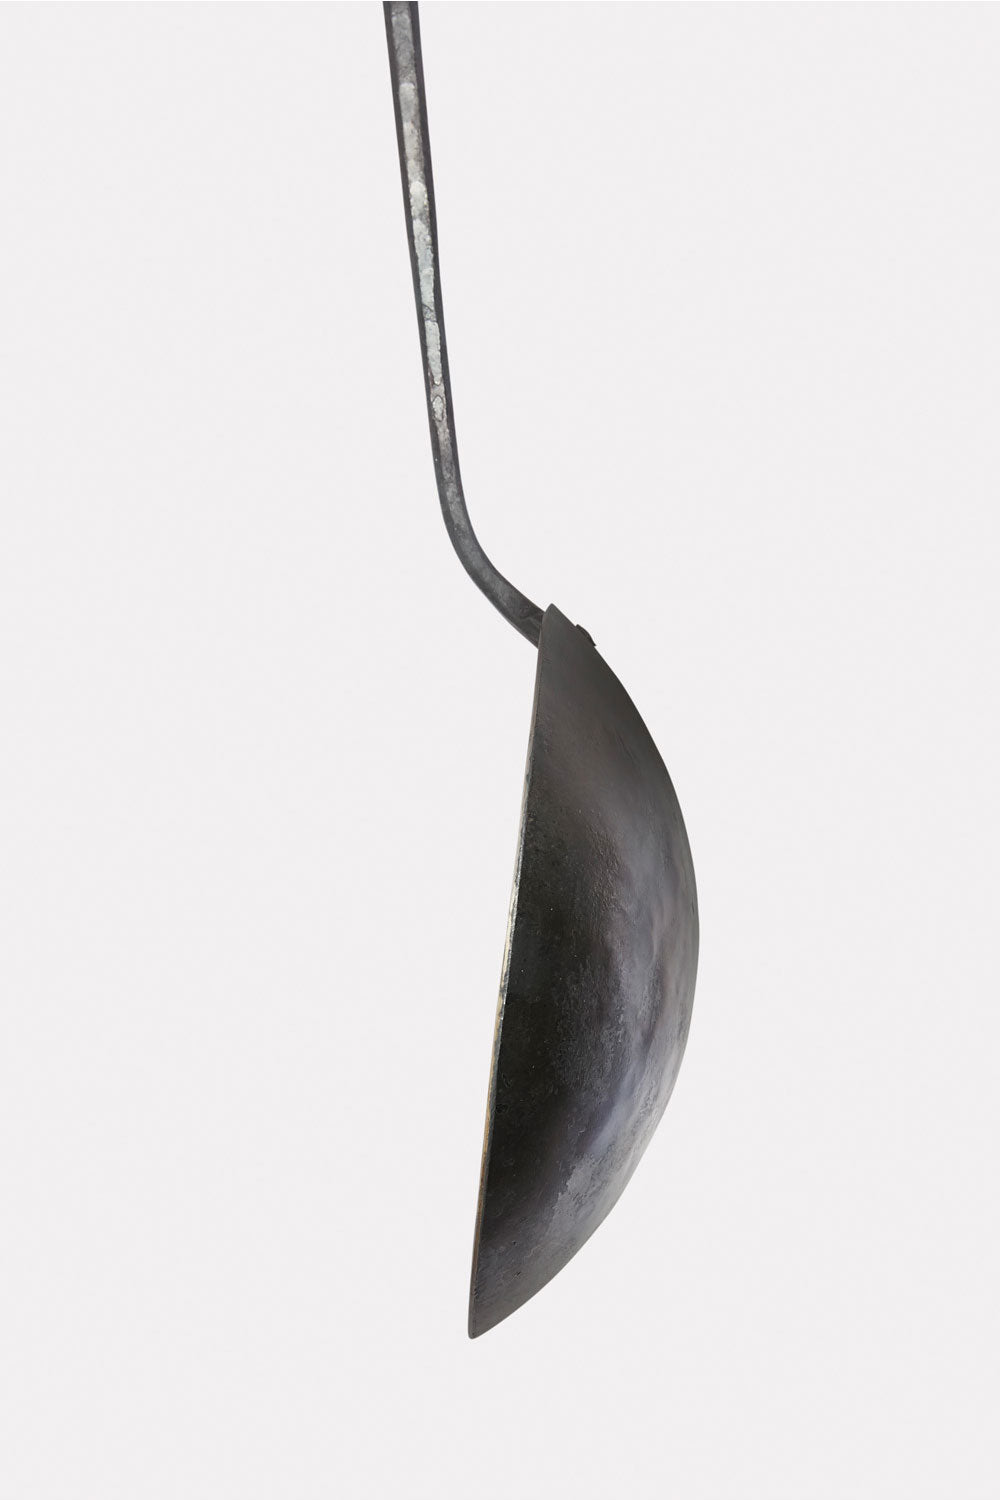 Permanent-Collection---Alice's-Egg-Spoon-2